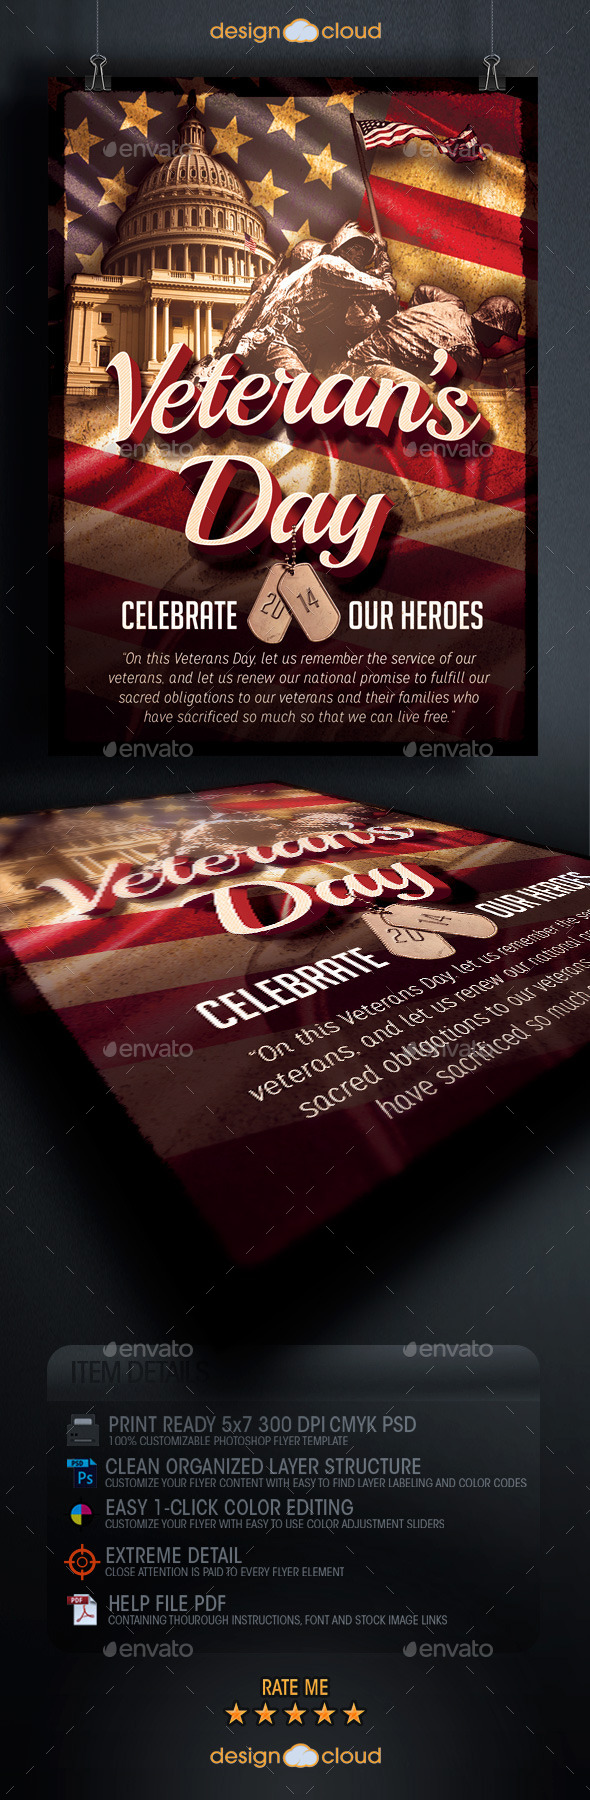 veteran-s-day-flyer-template-by-design-cloud-graphicriver